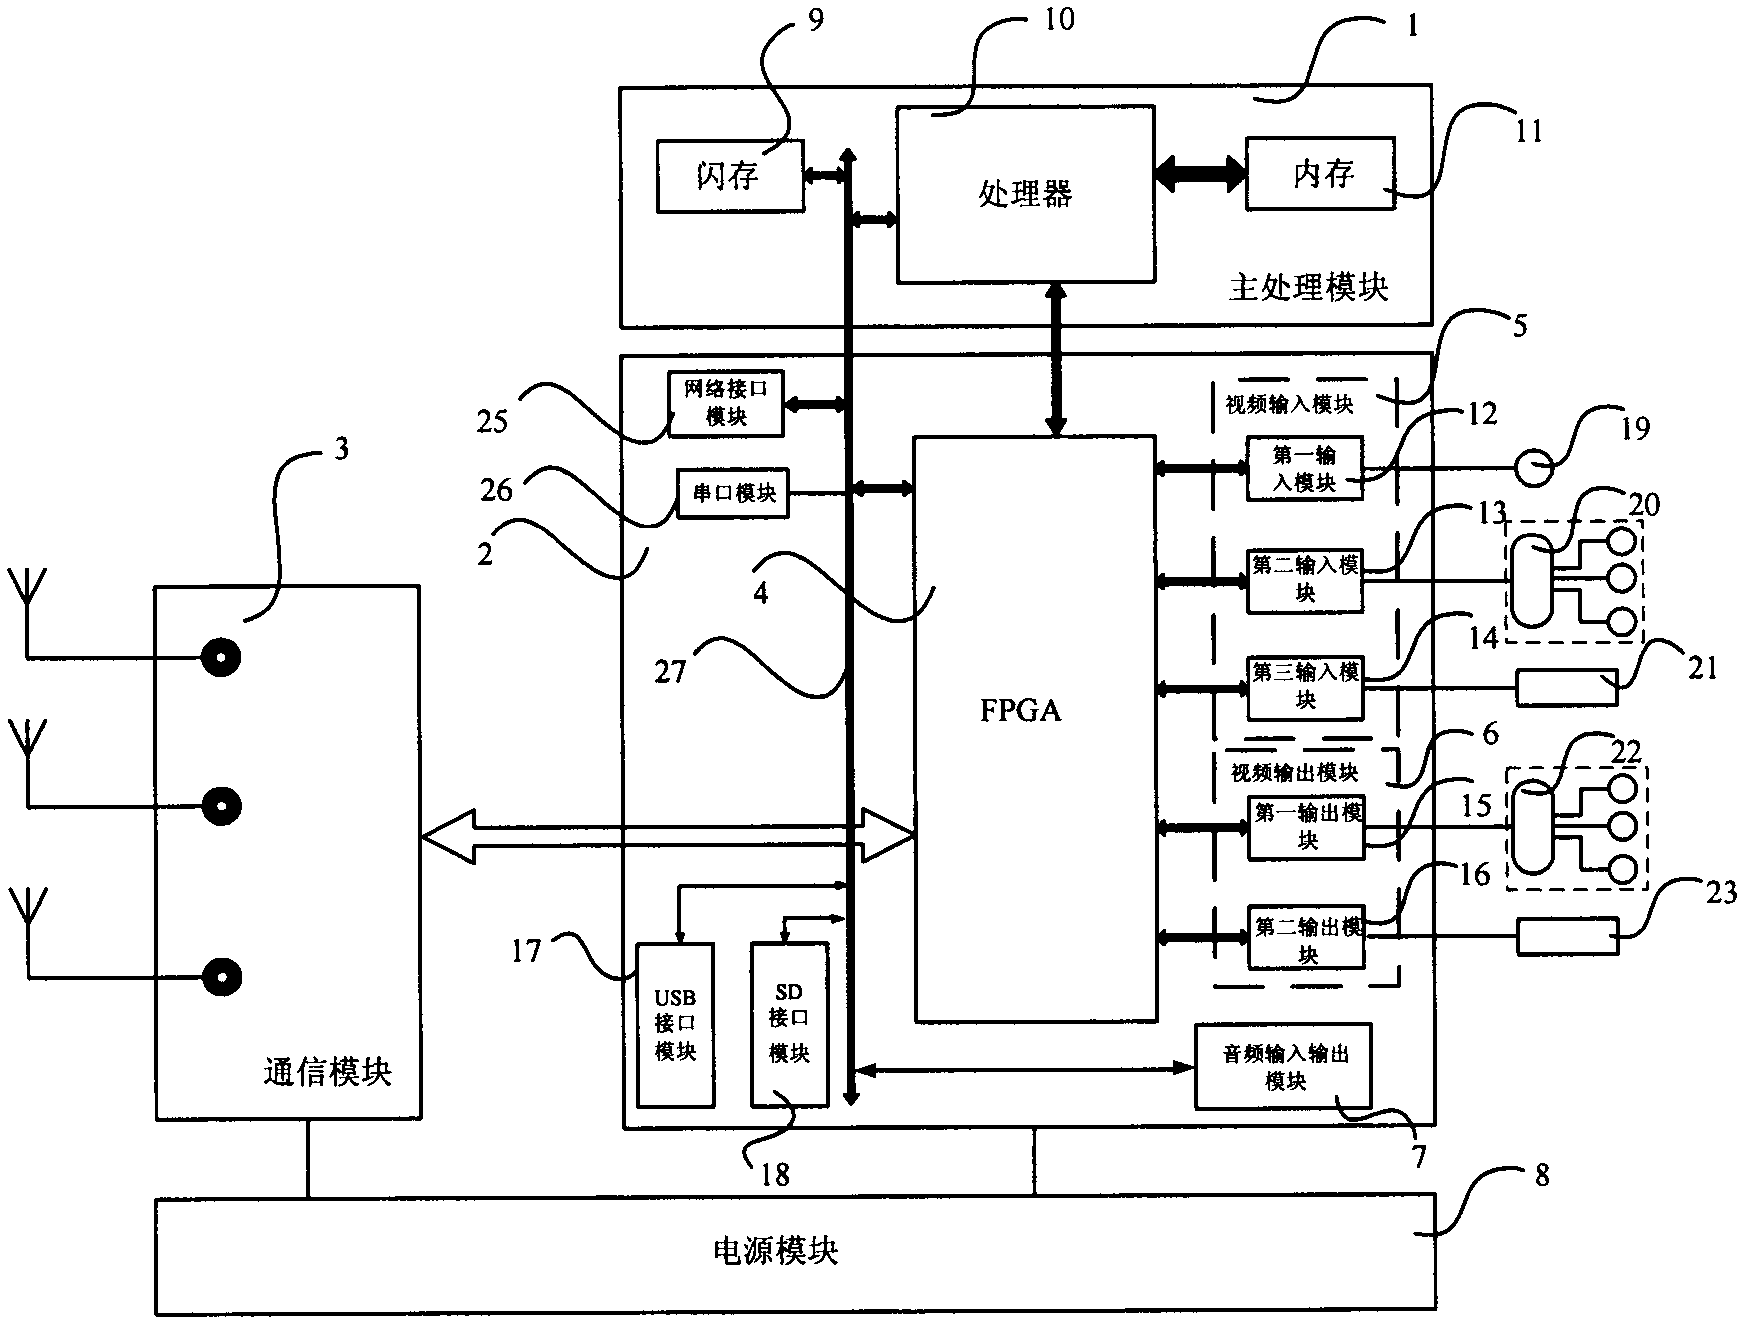 Multimedia transmission and processing apparatus